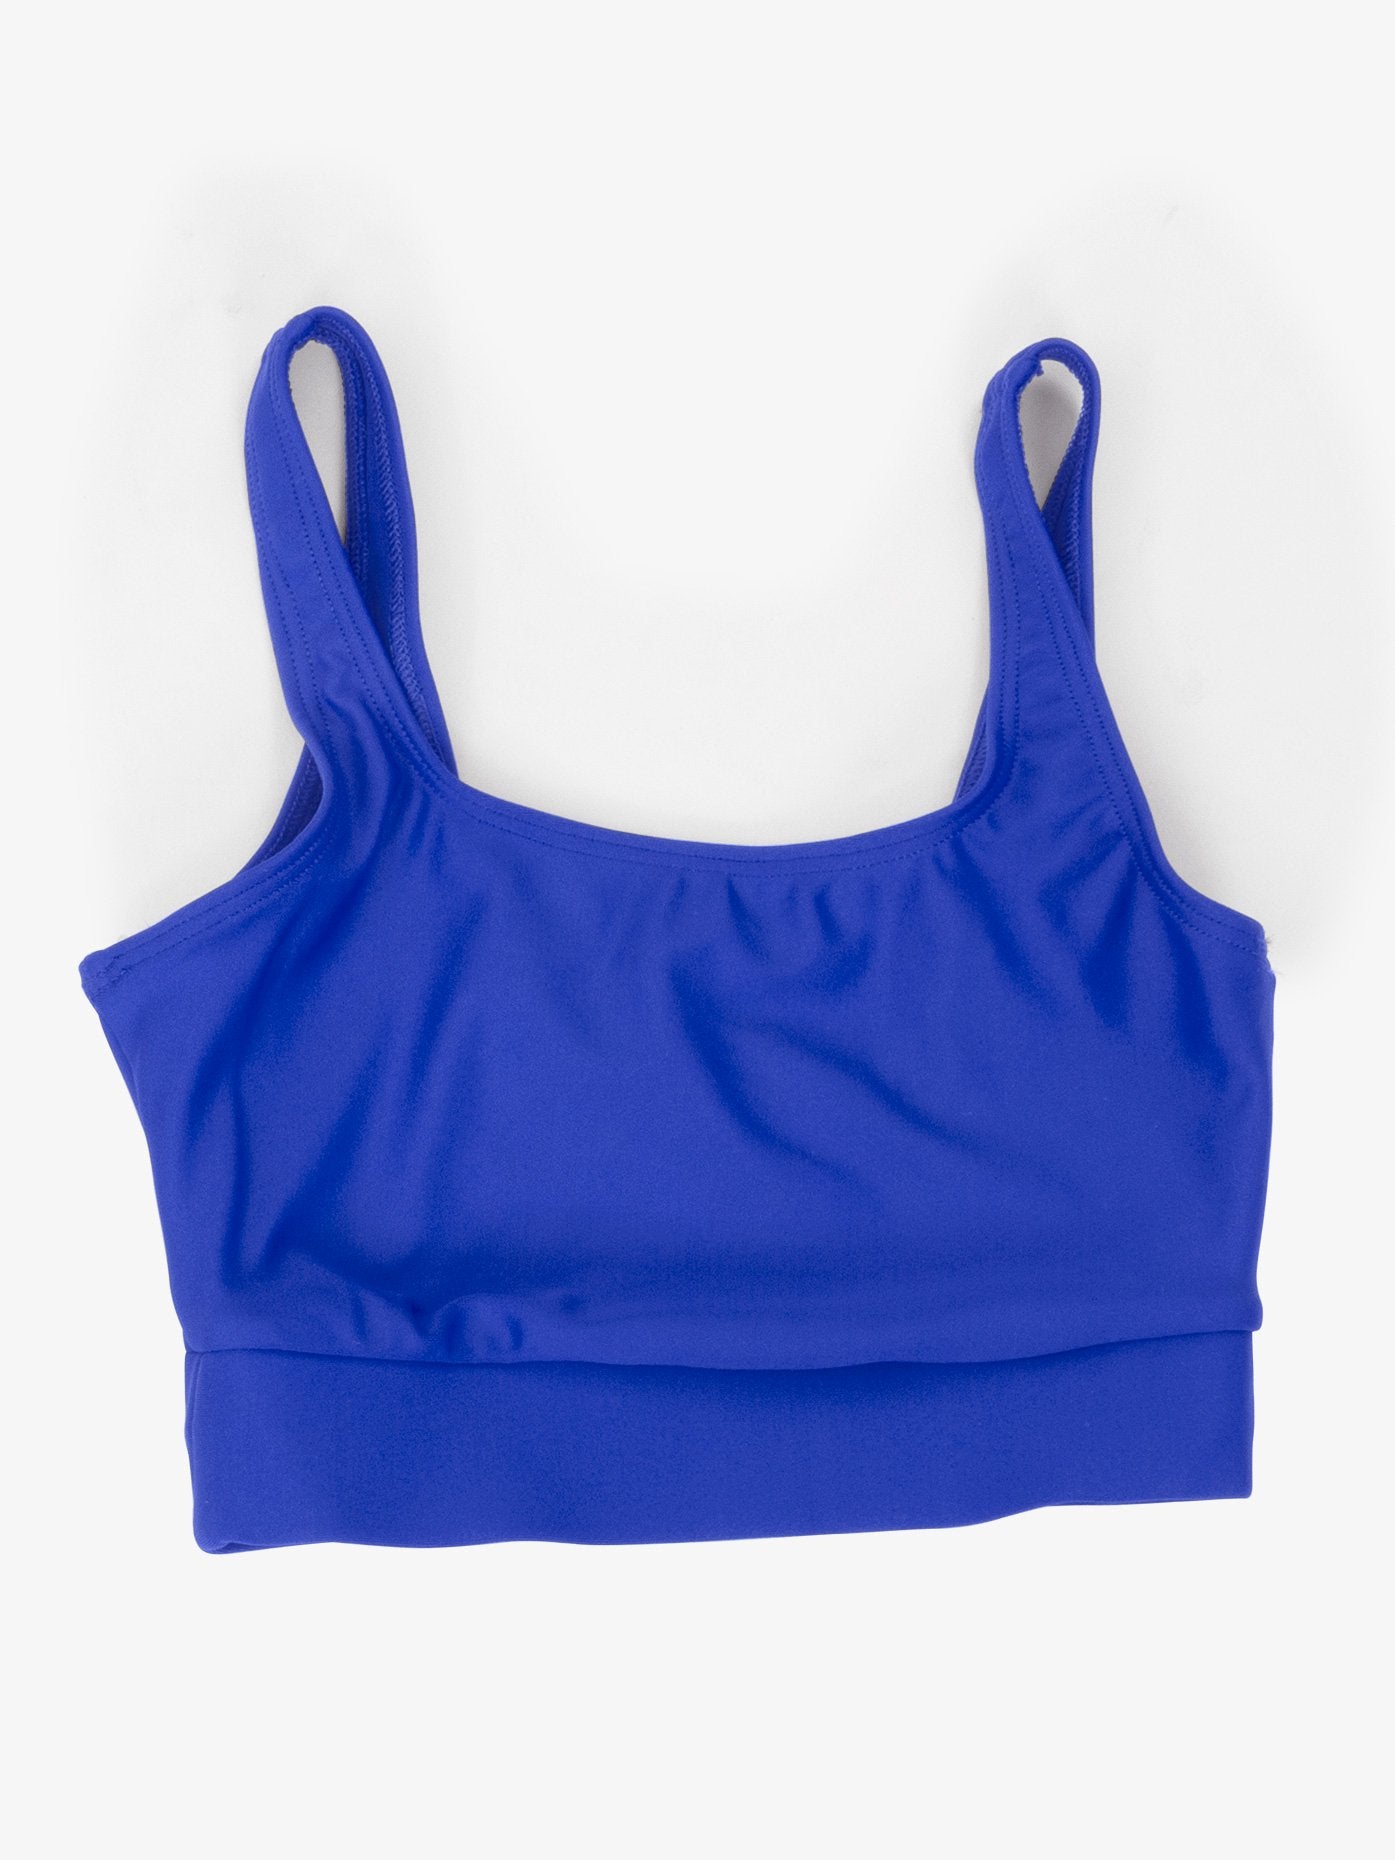 Women’s pinched back blue bra top